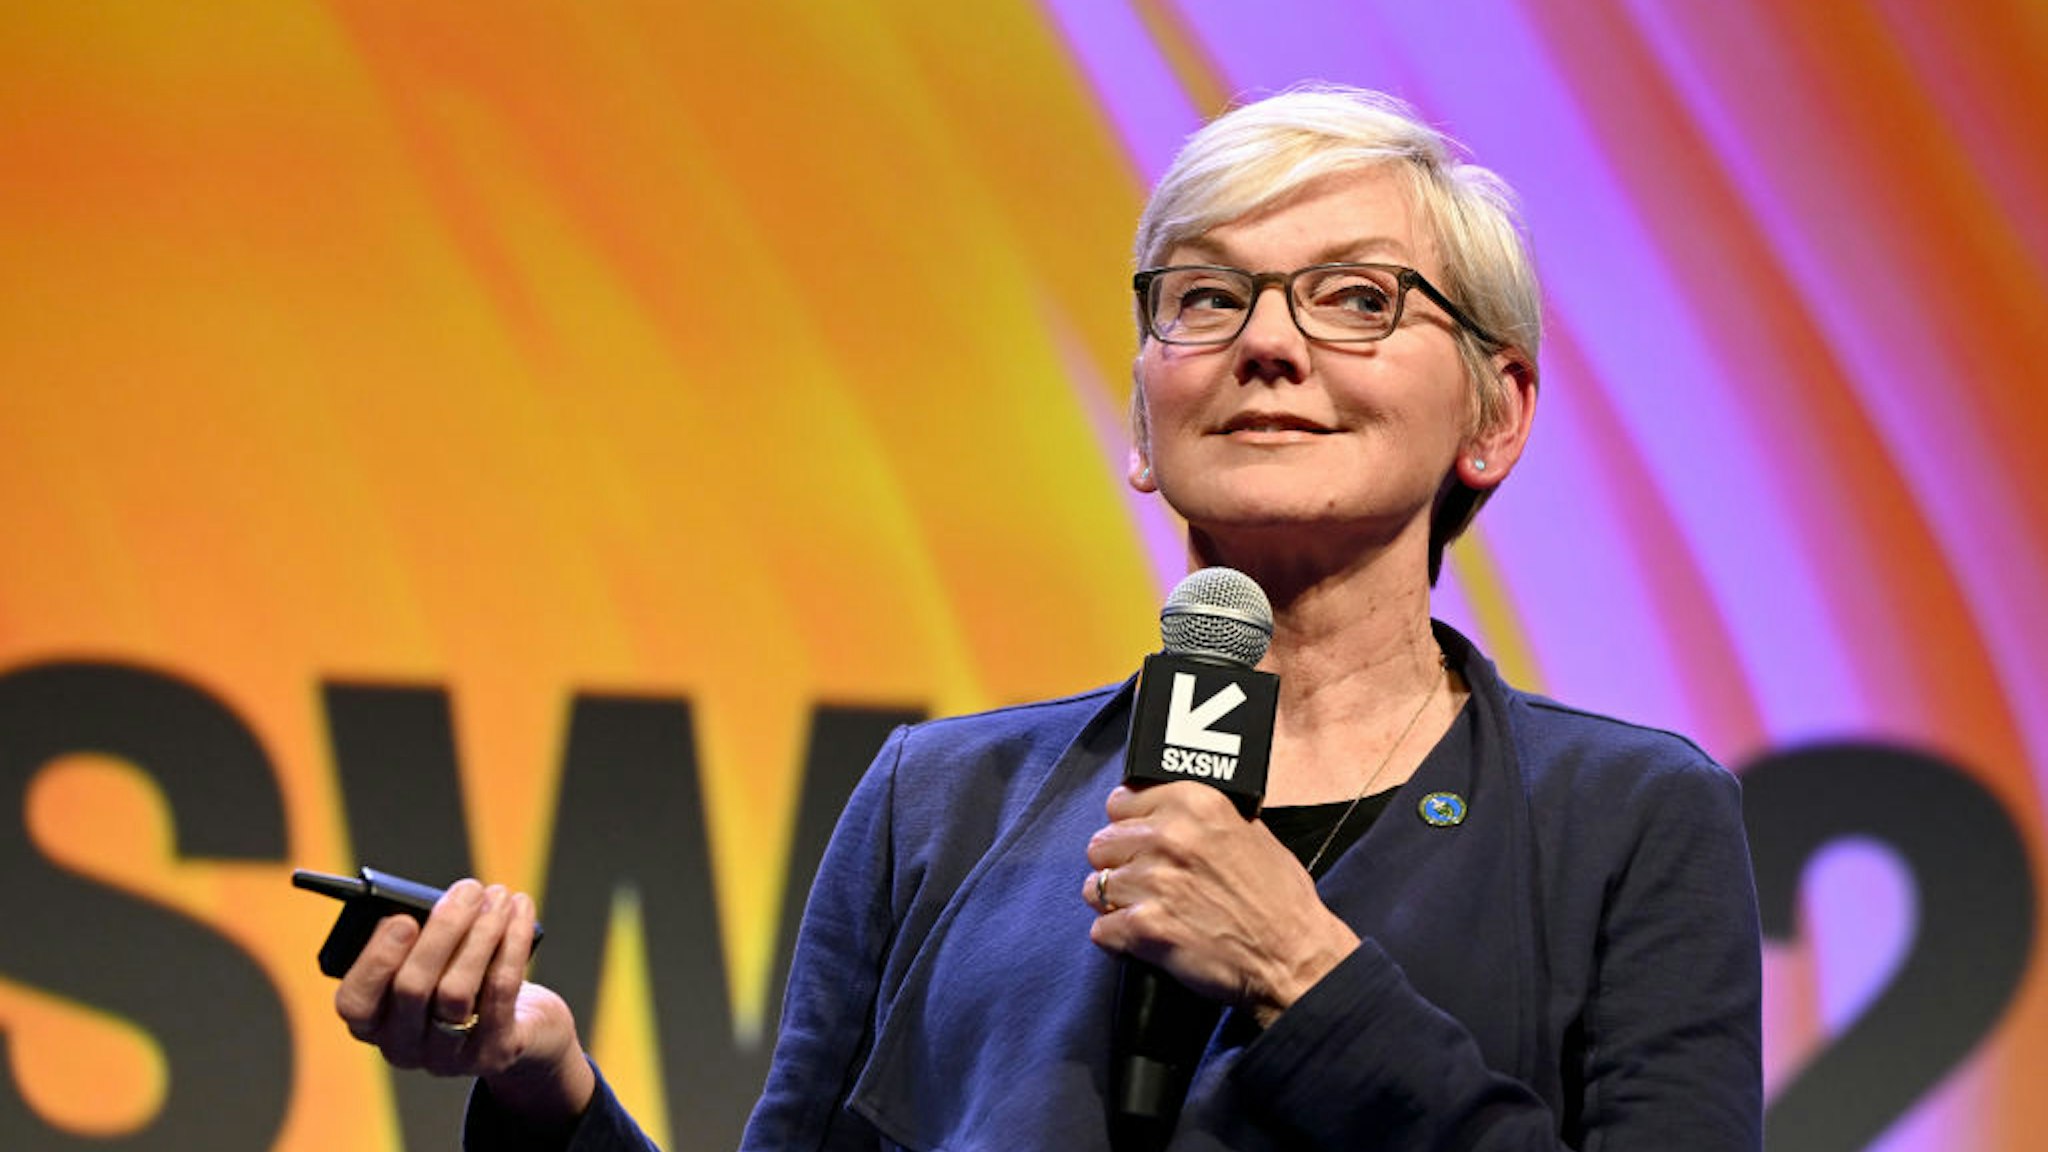 AUSTIN, TEXAS - MARCH 10: Jennifer M. Granholm speaks onstage during the 2023 SXSW Conference and Festivals at Hilton Austin on March 10, 2023 in Austin, Texas.